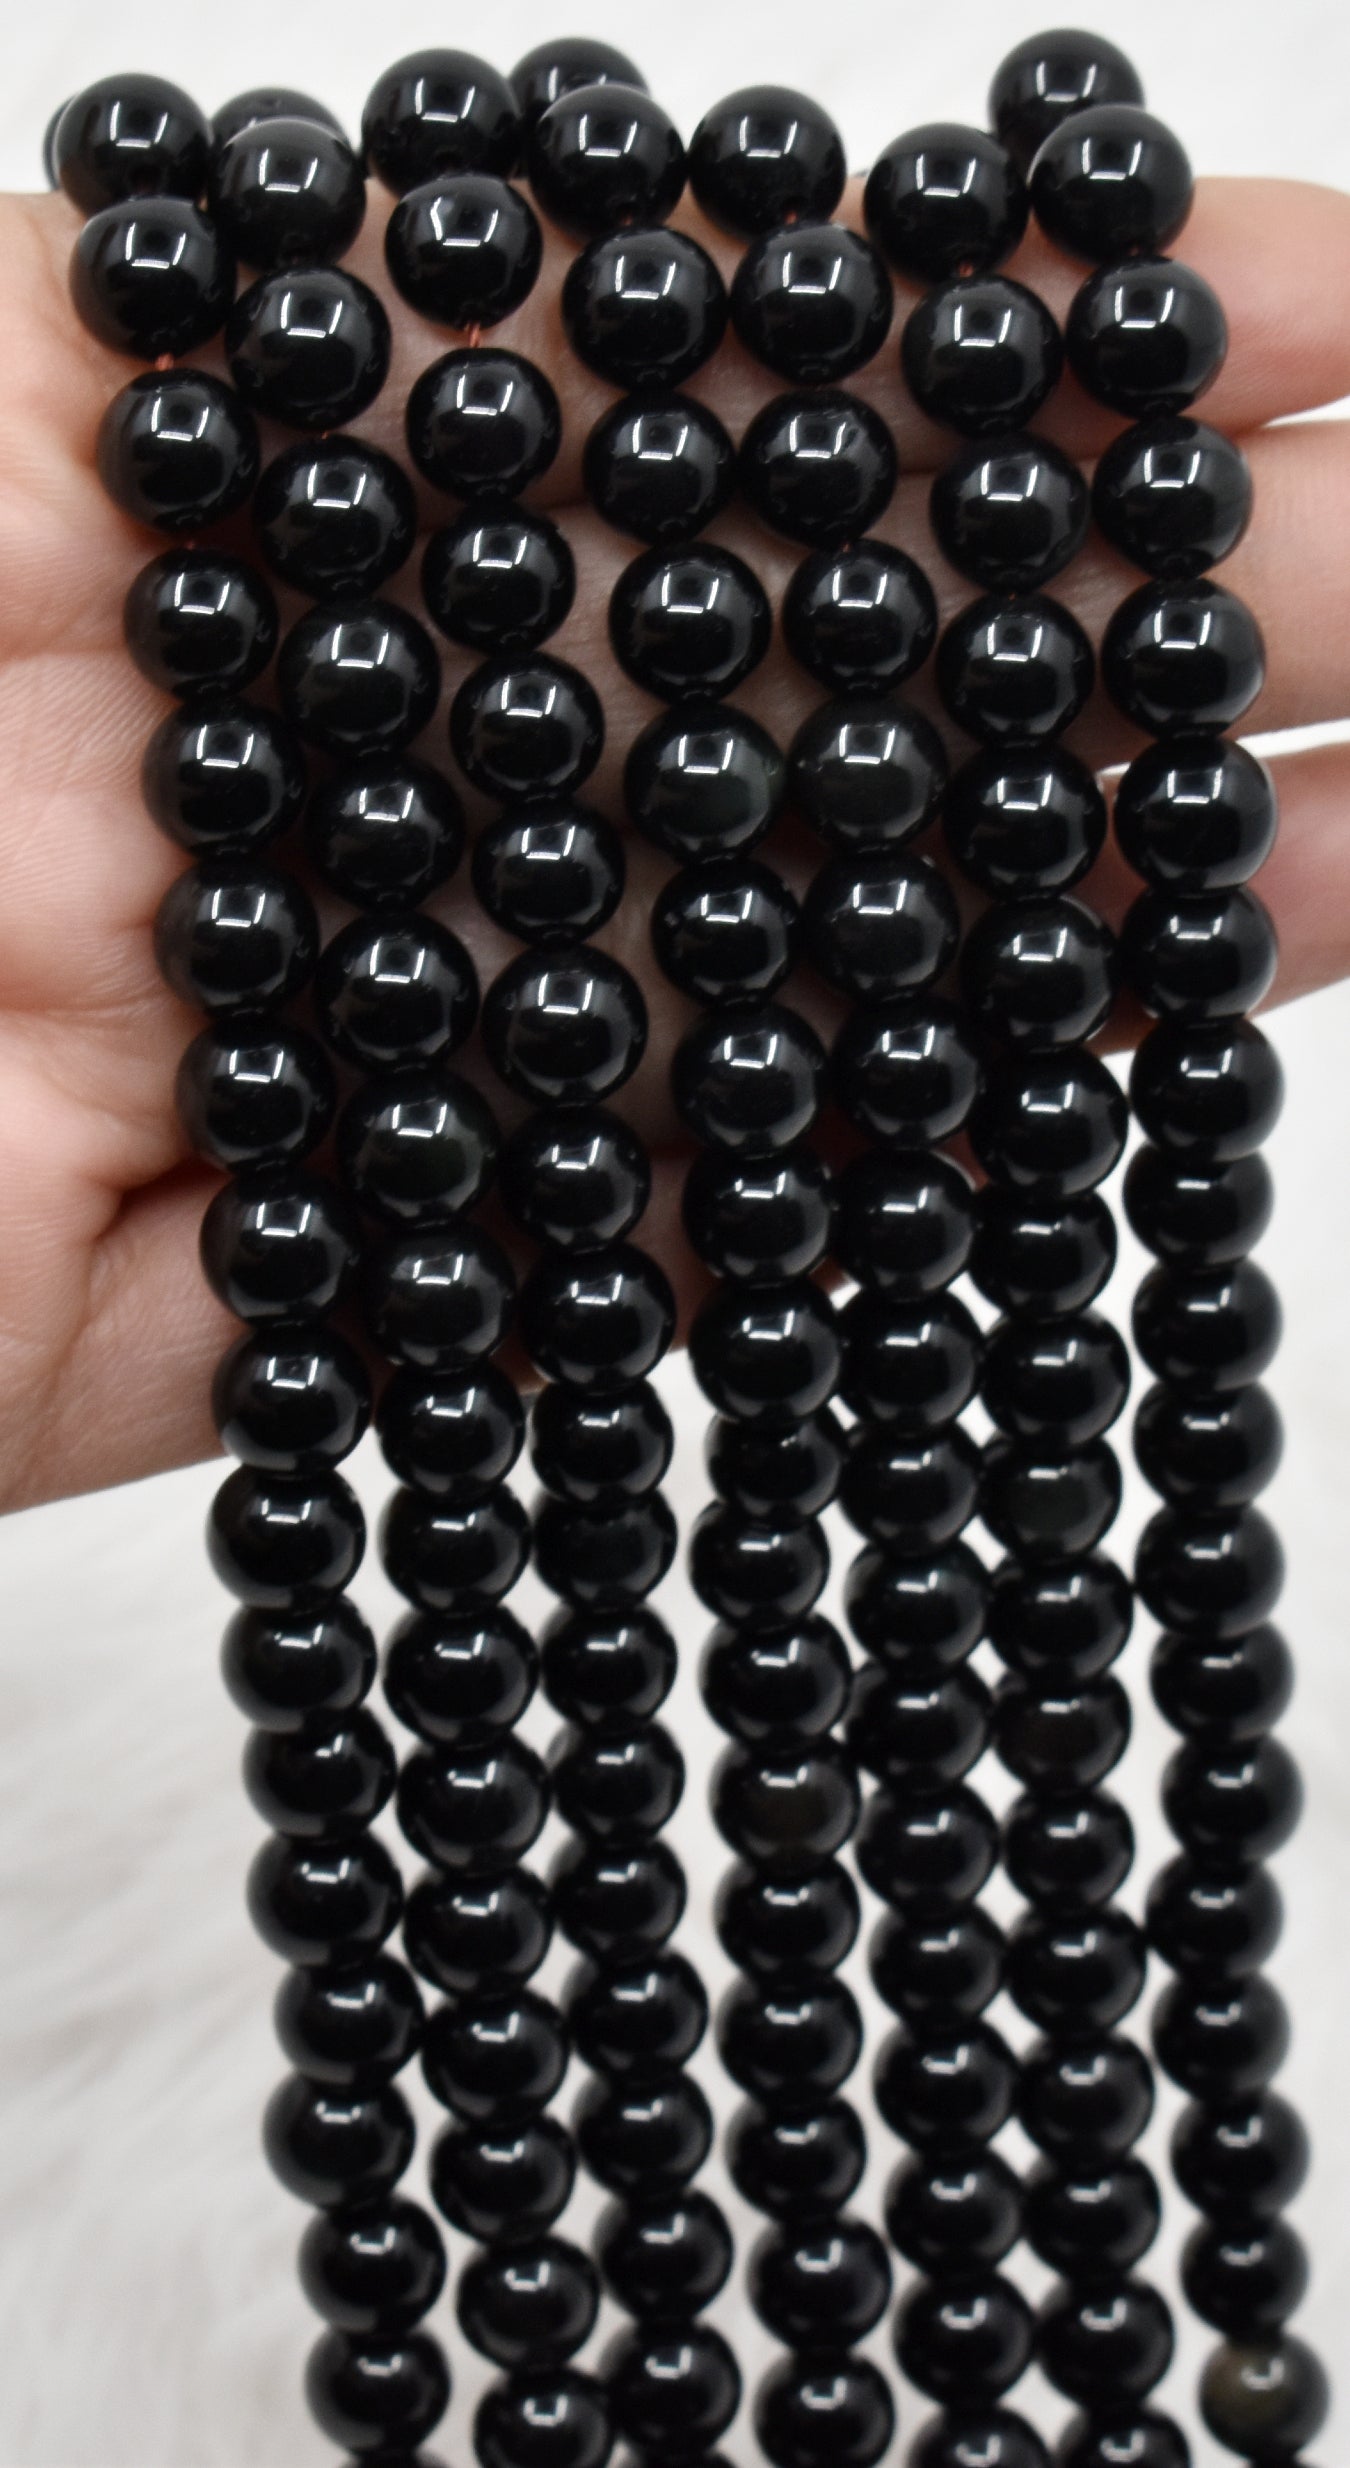 Black Obsidian Beads, Natural Round Crystal Beads 4mm to 18mm